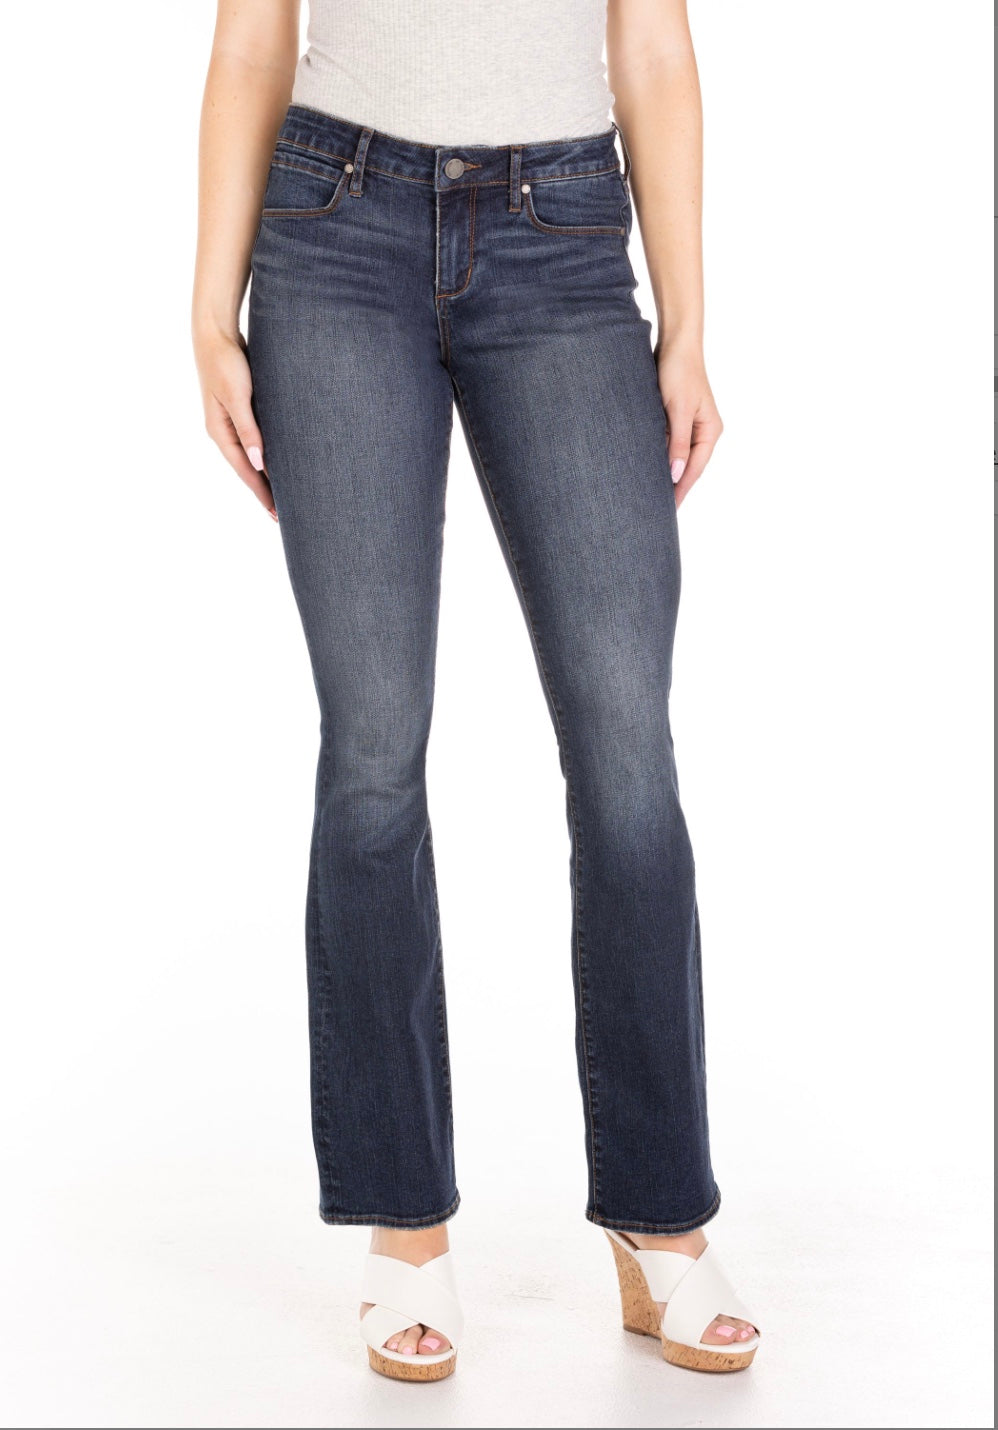 Articles of Society Dark Wash Kendra Boot Cut Jeans Final Sale